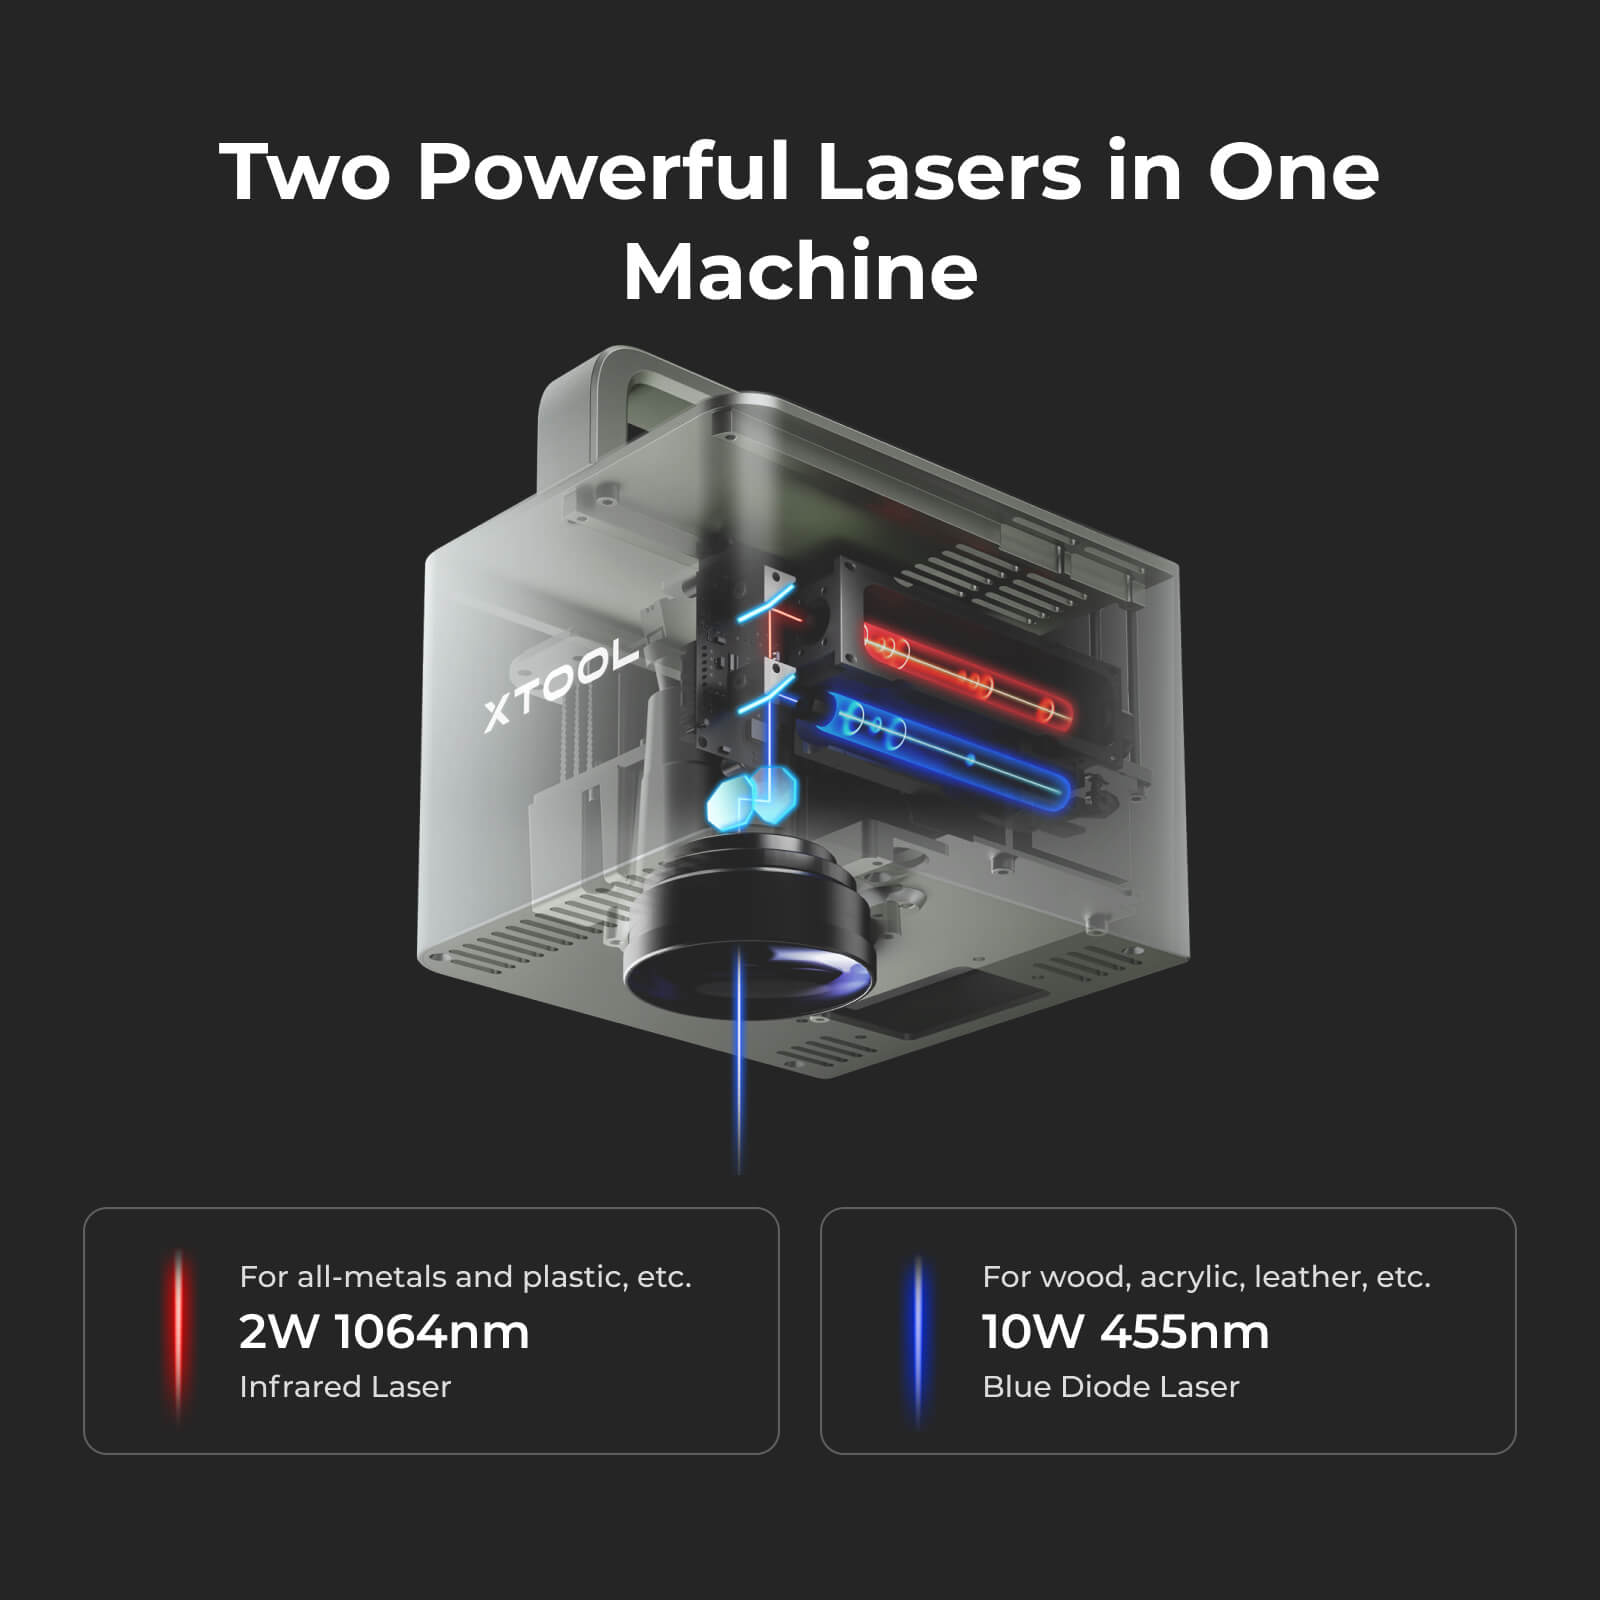 xTool F1: Fastest Portable Laser Engraver with IR + Diode Laser